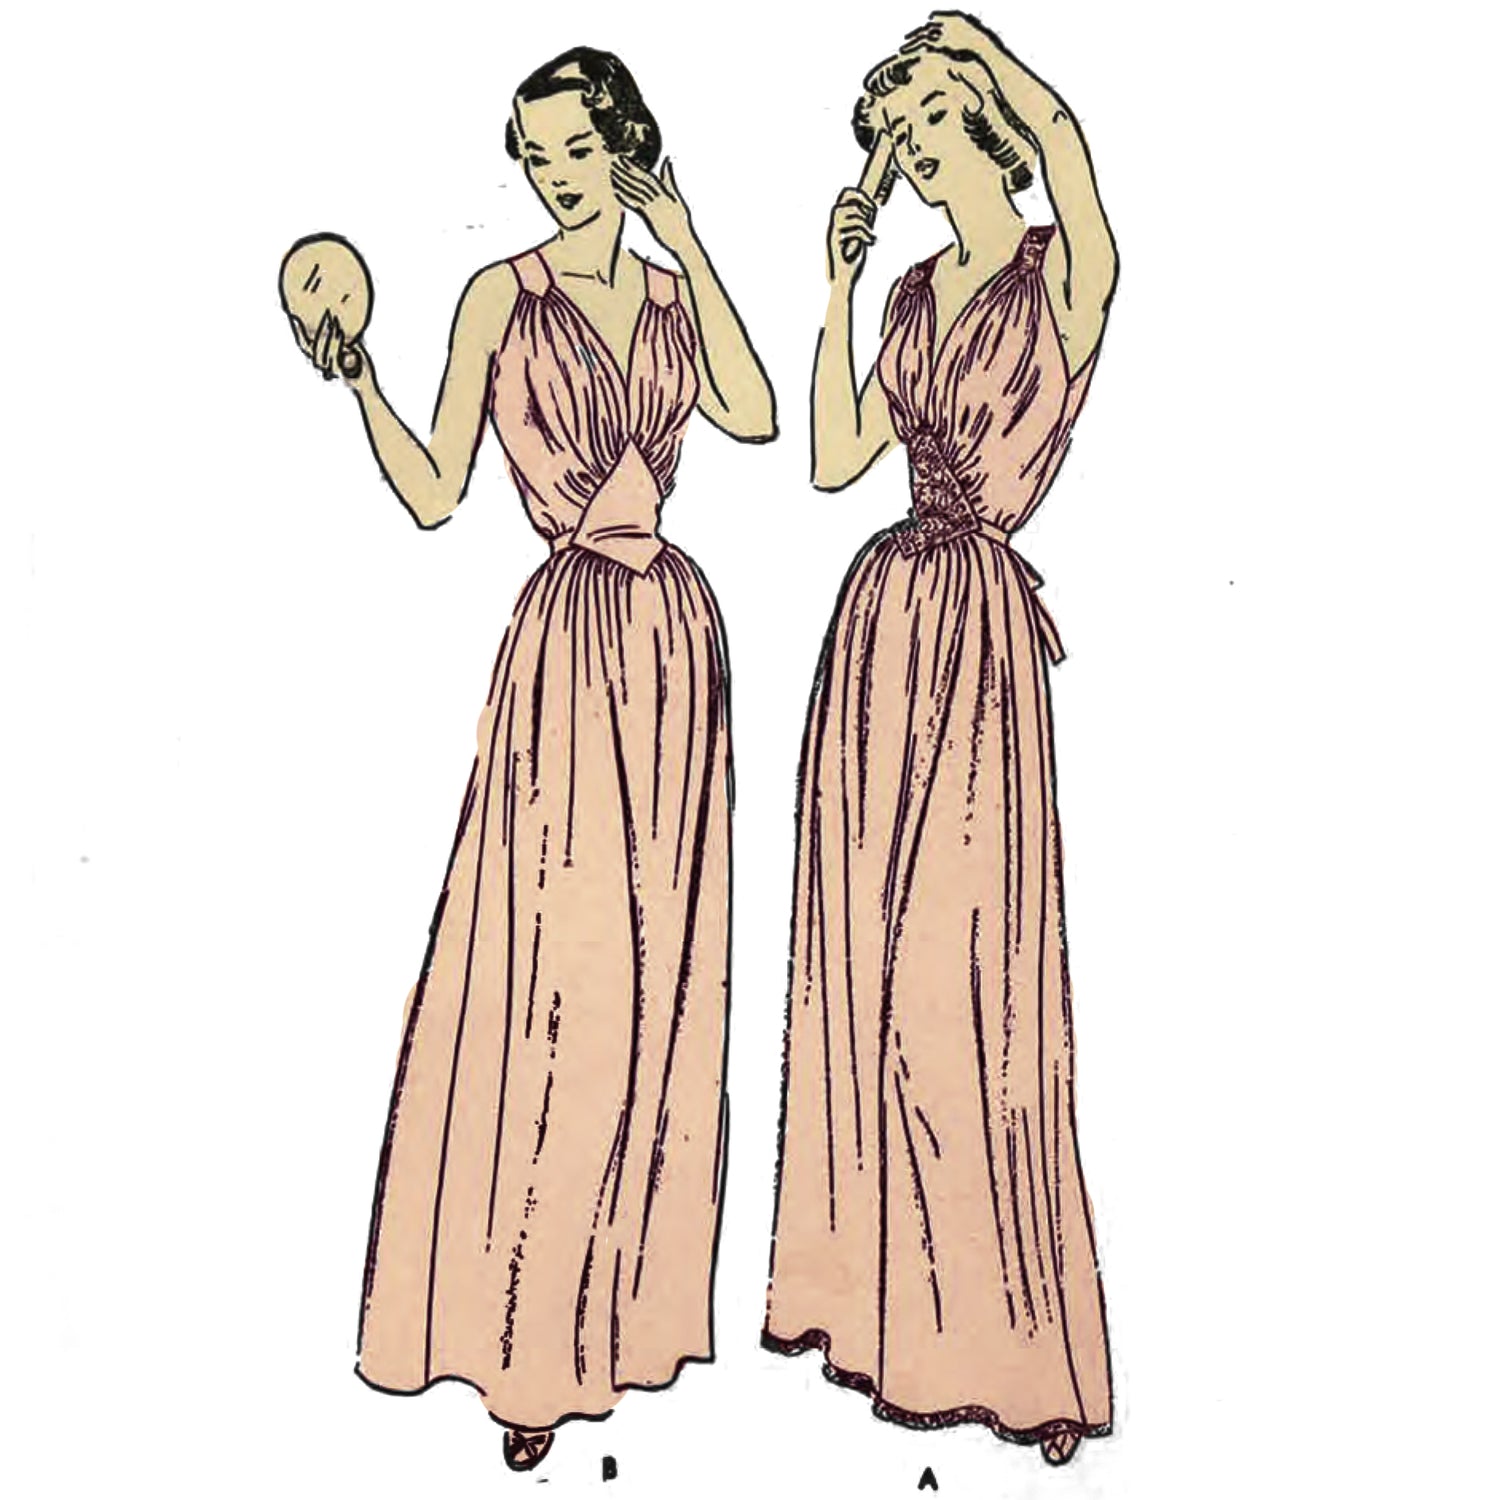 Two women wearing floor length night gowns. Left illustrates View B, right View A.